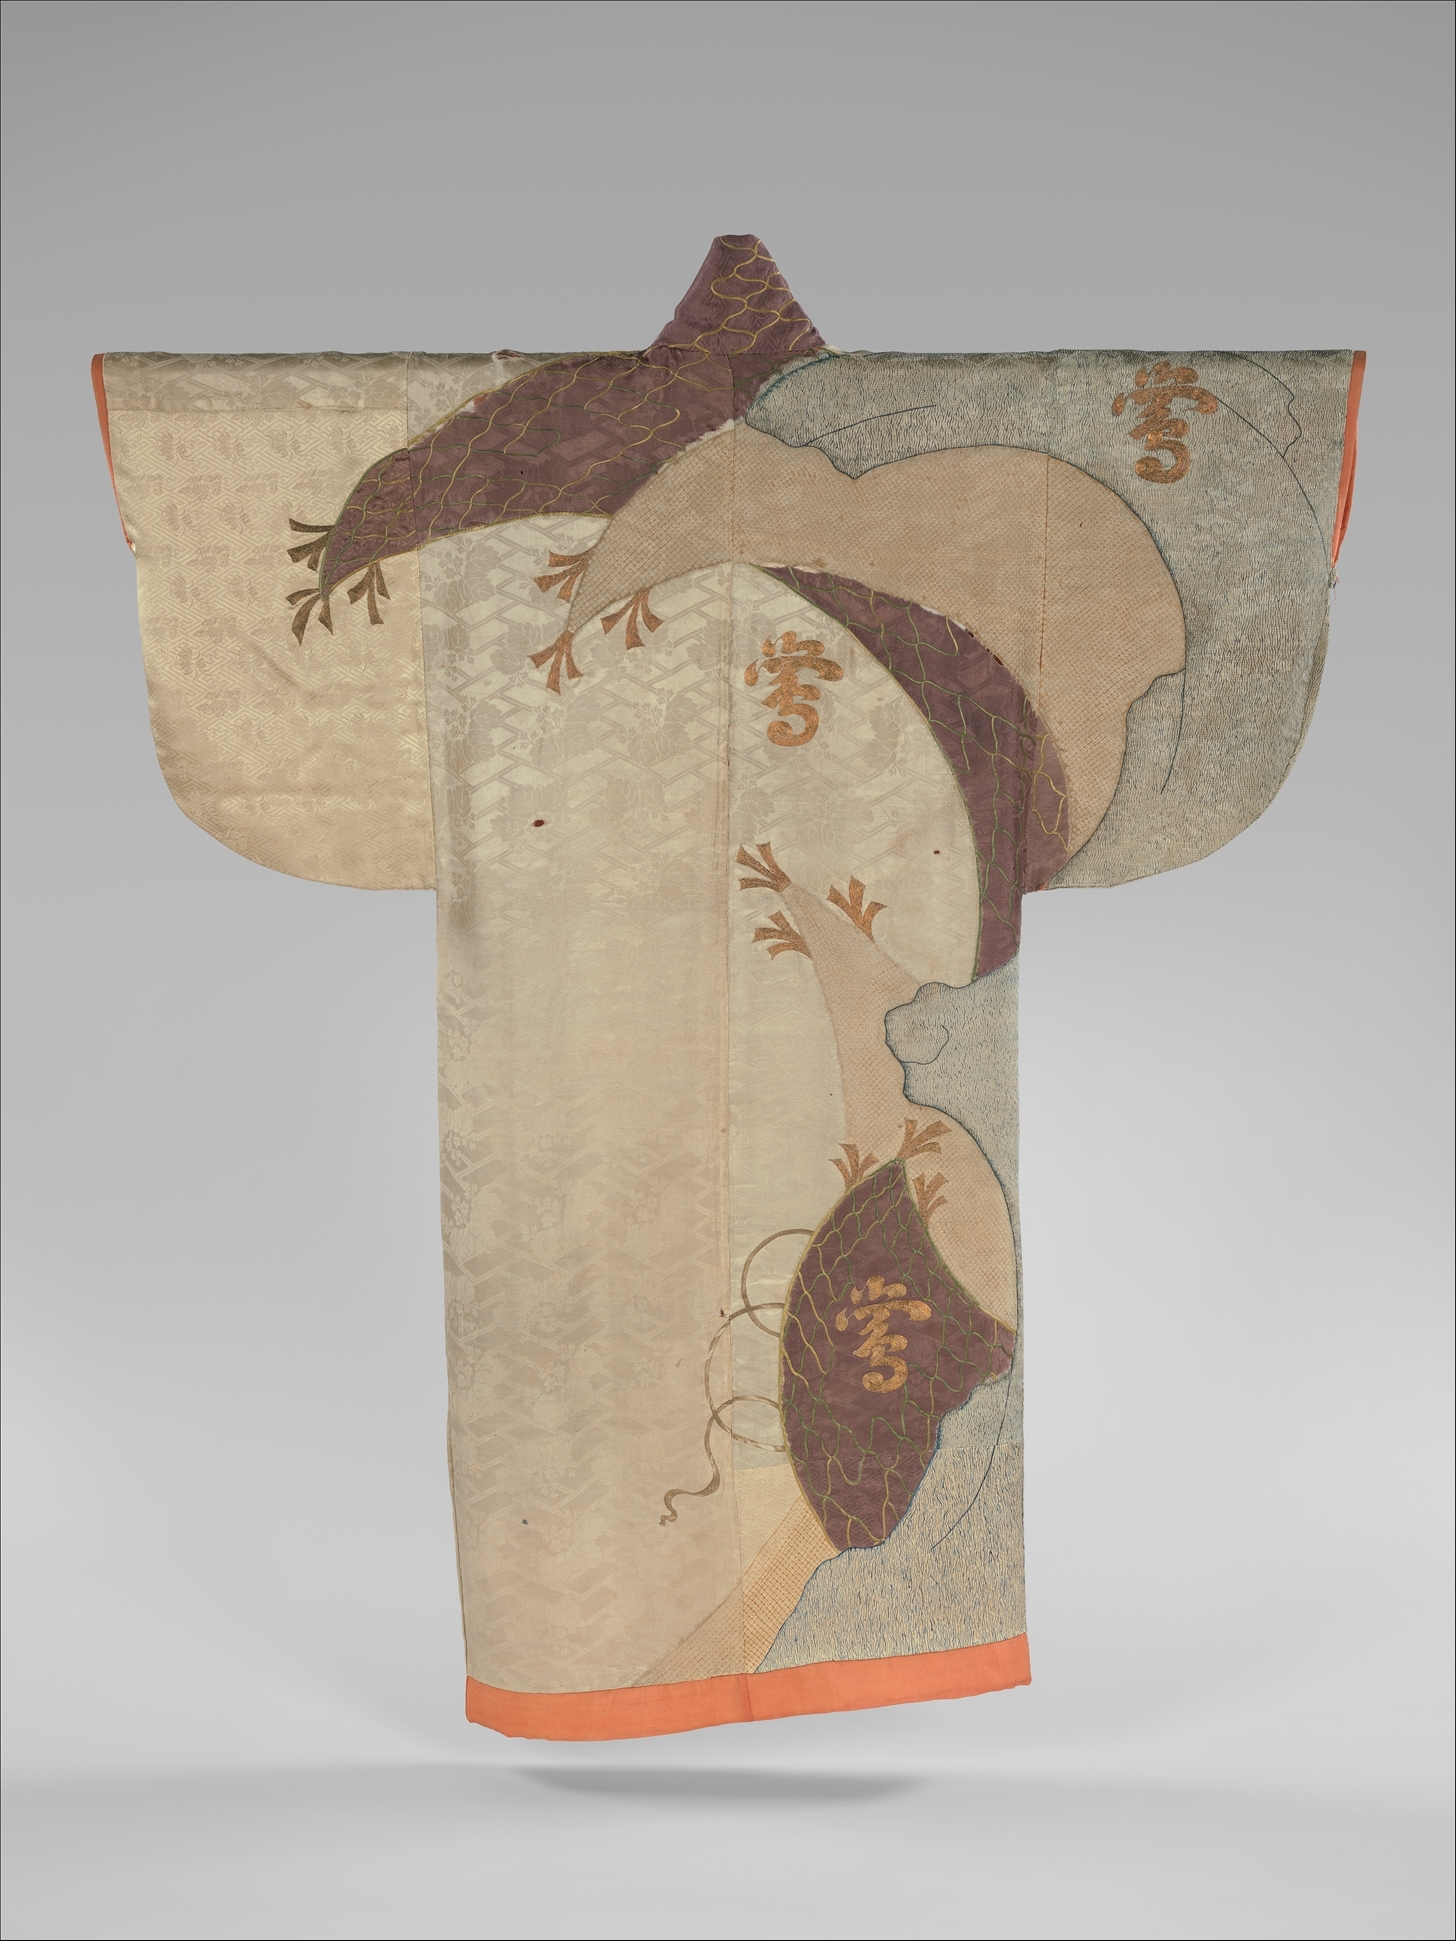 Robe (Kosode) with Fishing Net and Characters, Japan, Edo period  (1615–1868)